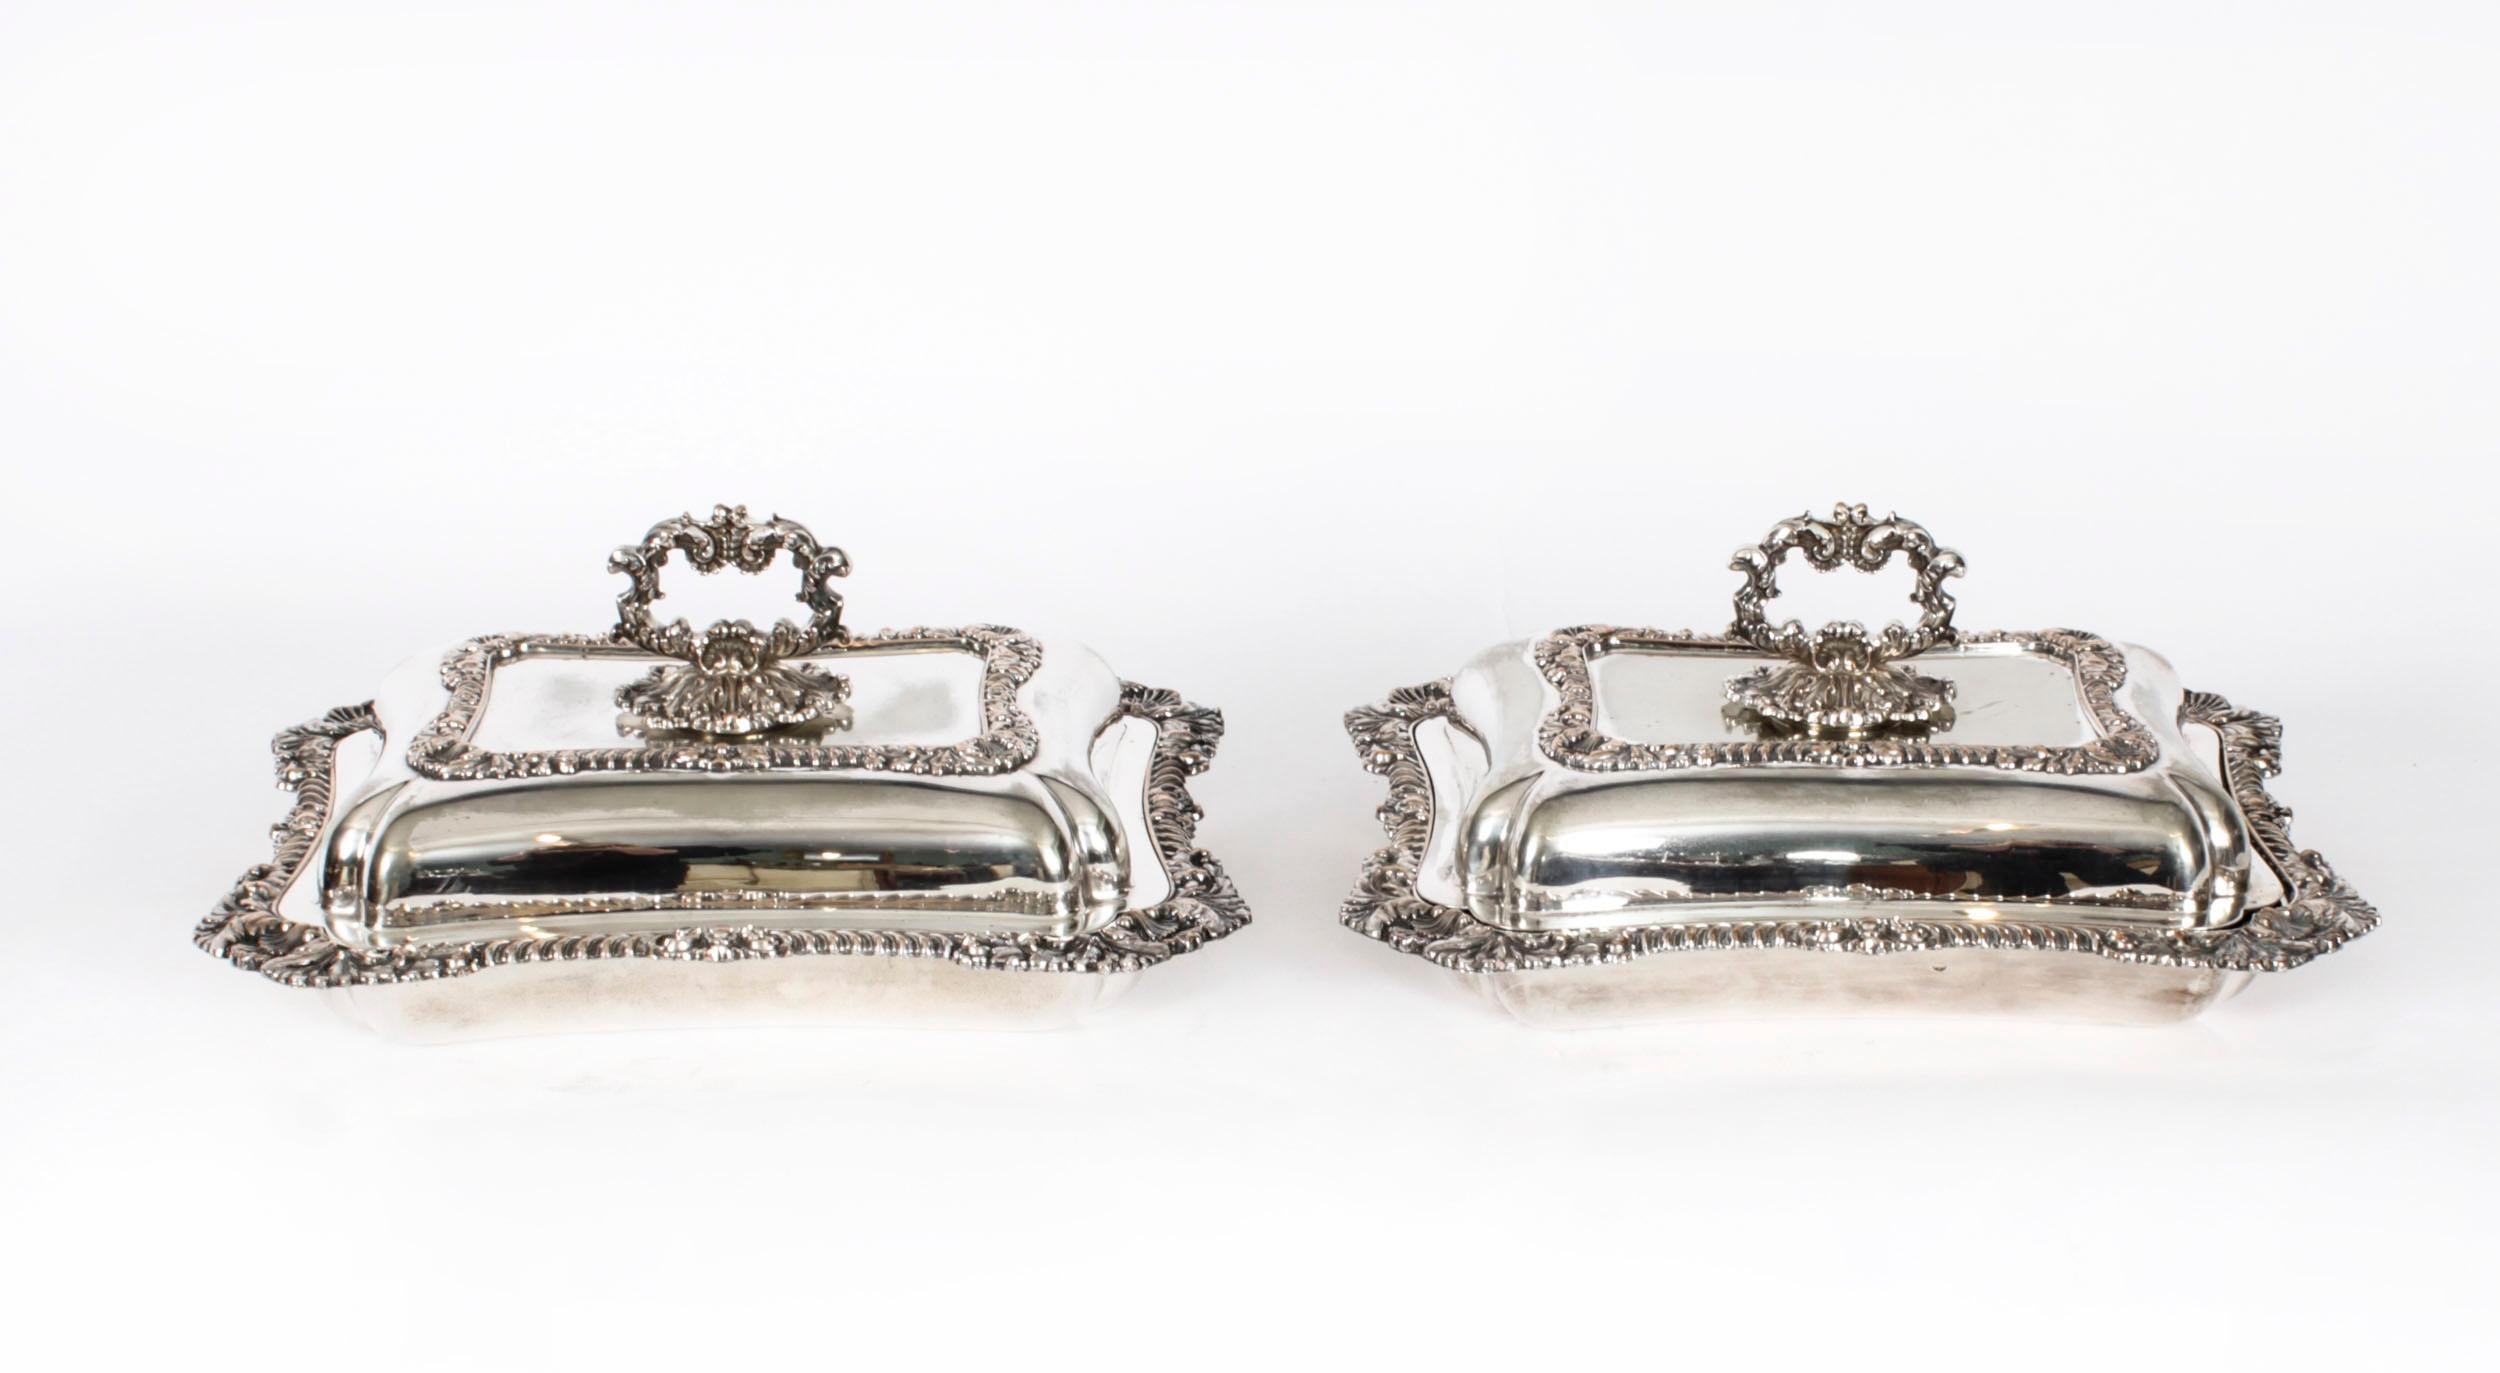 This is an exquisite and rare antique pair of English silver plated on copper entree dishes stamped Walker & Hall Sheffield Plate Old Style, and dated Circa 1860.
 
The dishes are of rectangular shaped form with gaddrooned and acanthus leaf borders